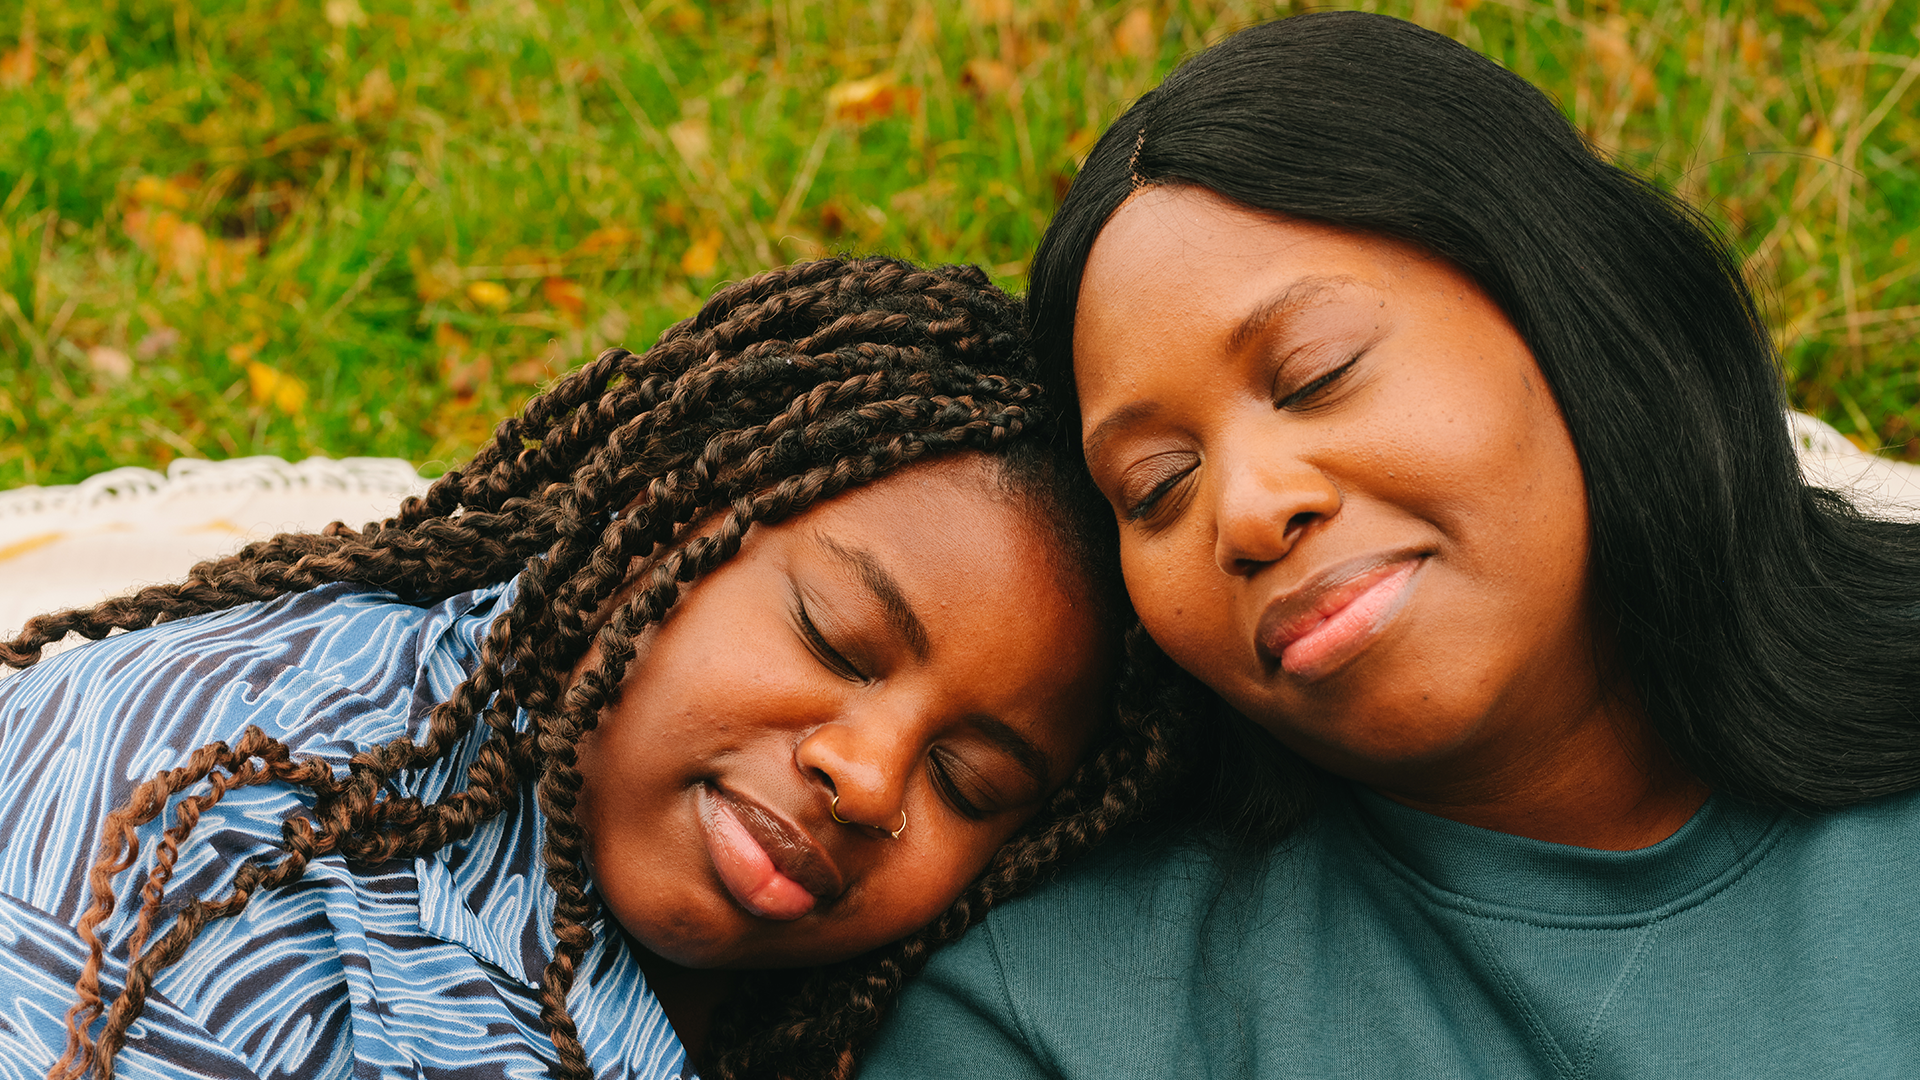 A young Black woman and an older Black woman leaning their heads on each other's shoulders and smiling. Their eyes are closed.